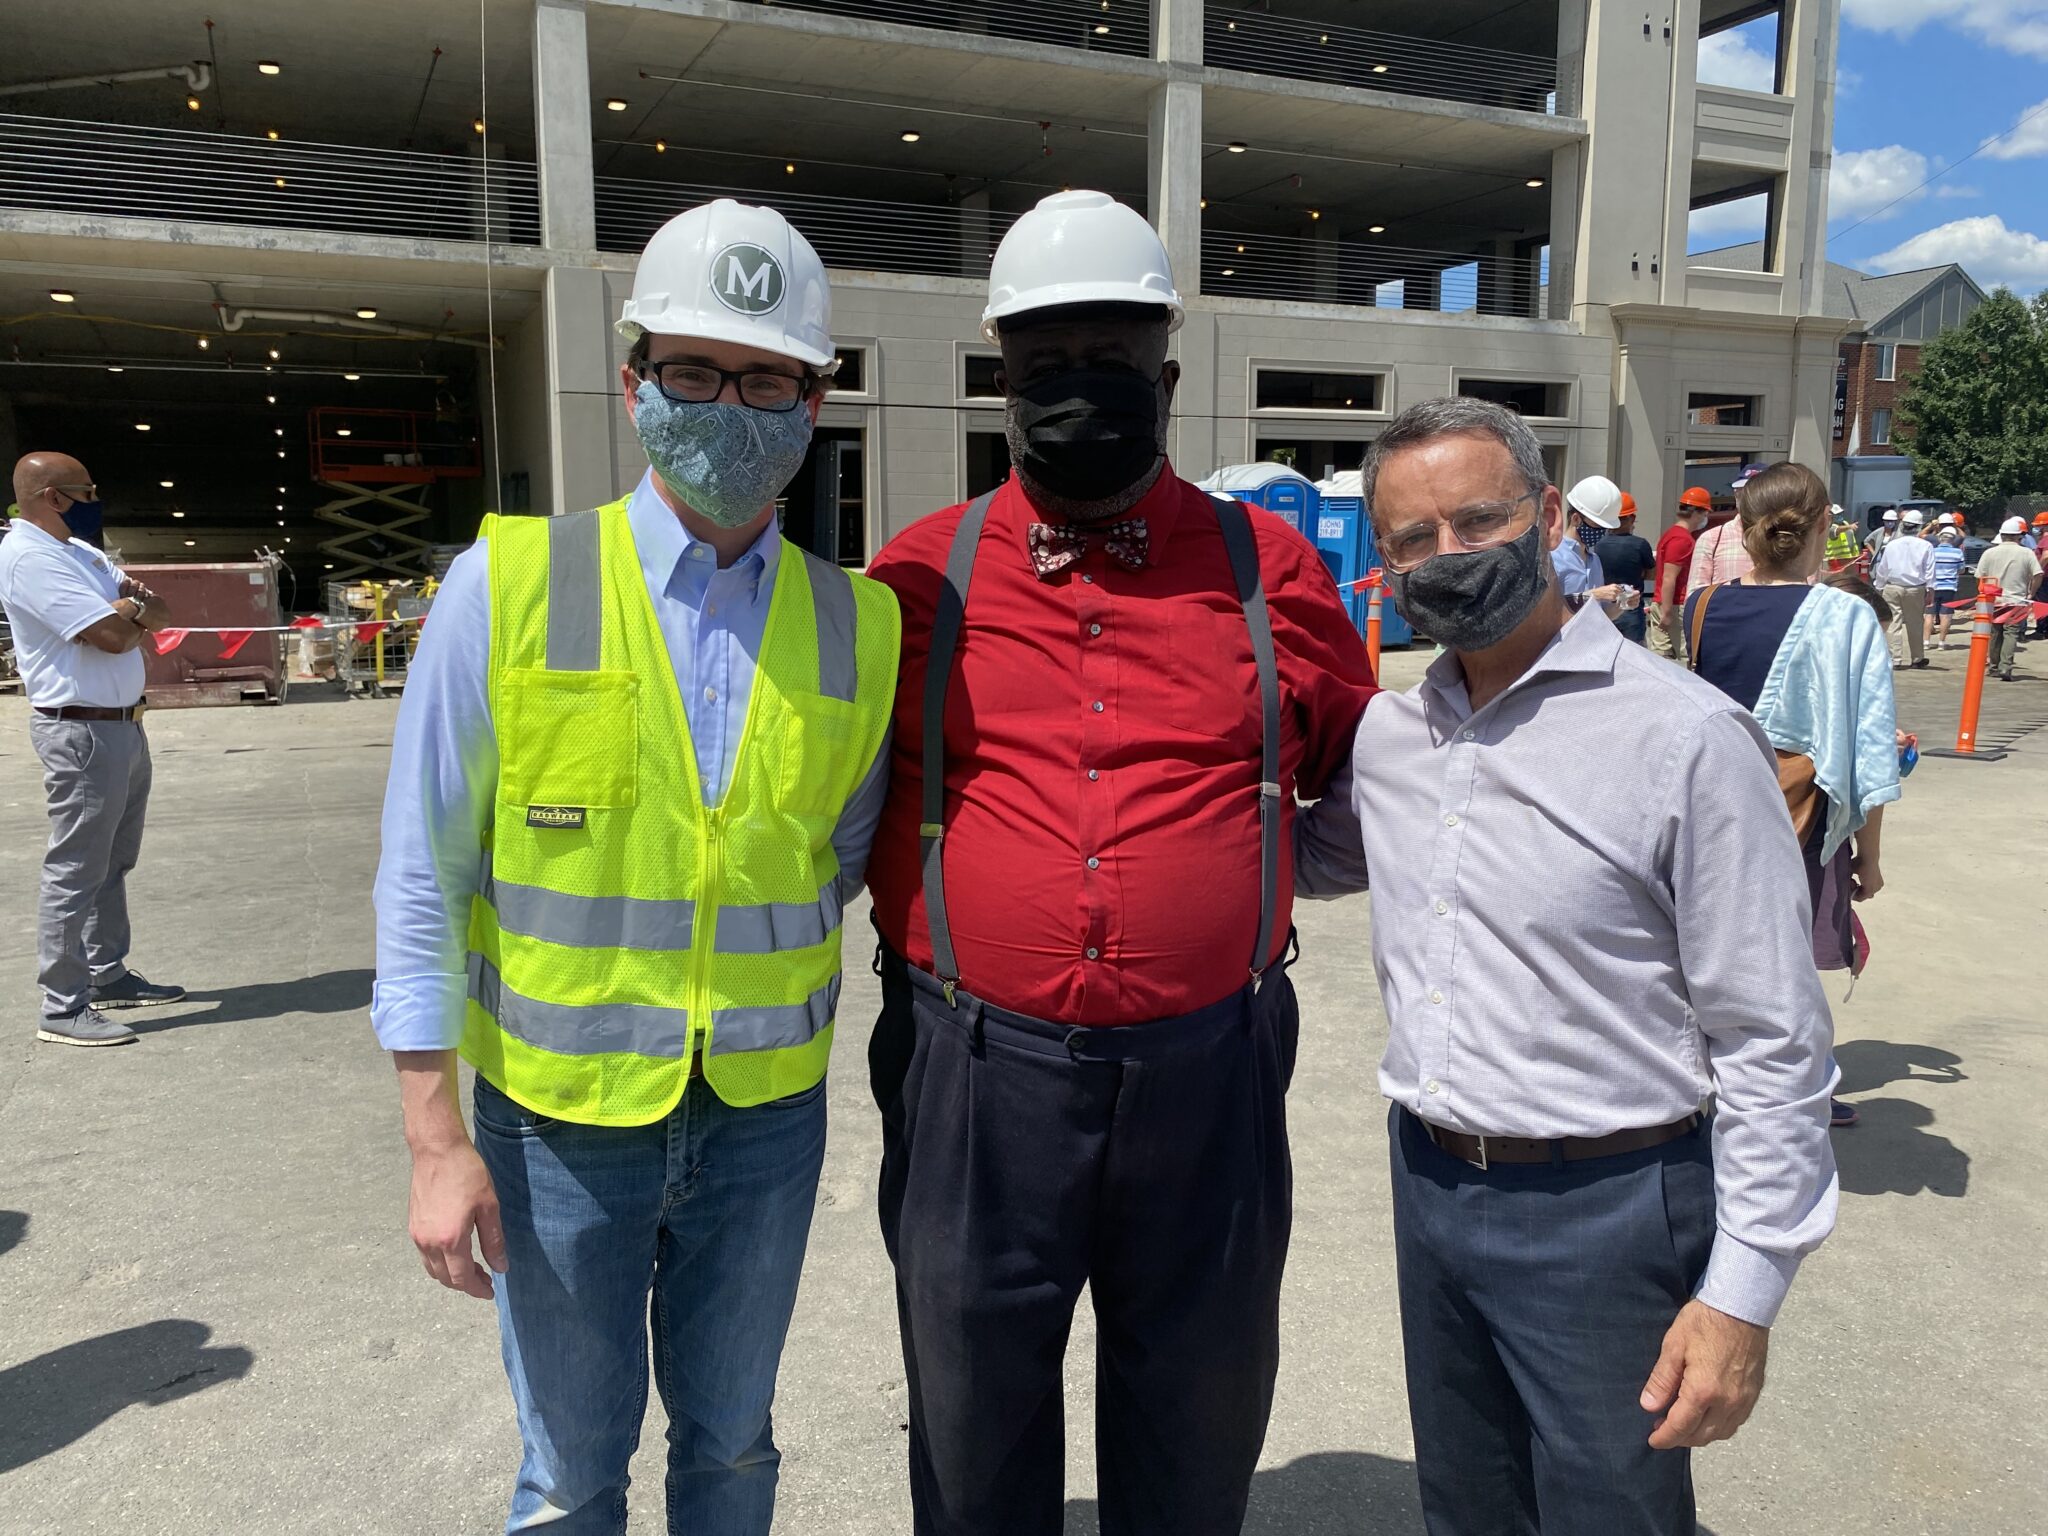 300 East – Topping Ceremony – City Council Members